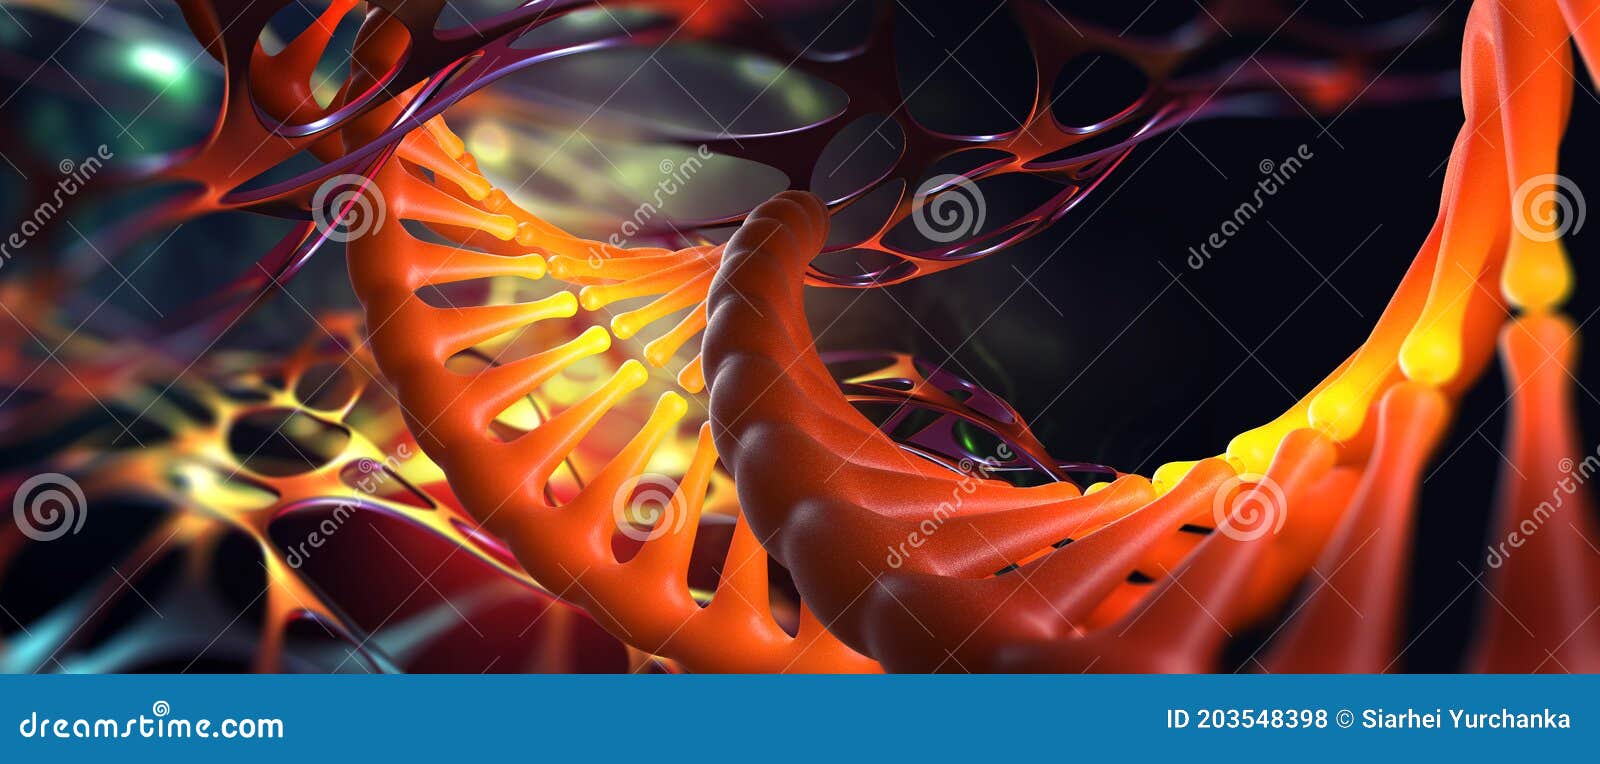 dna helix. scientific research. genome decoding and medical innovation. 3d  of a dna molecule